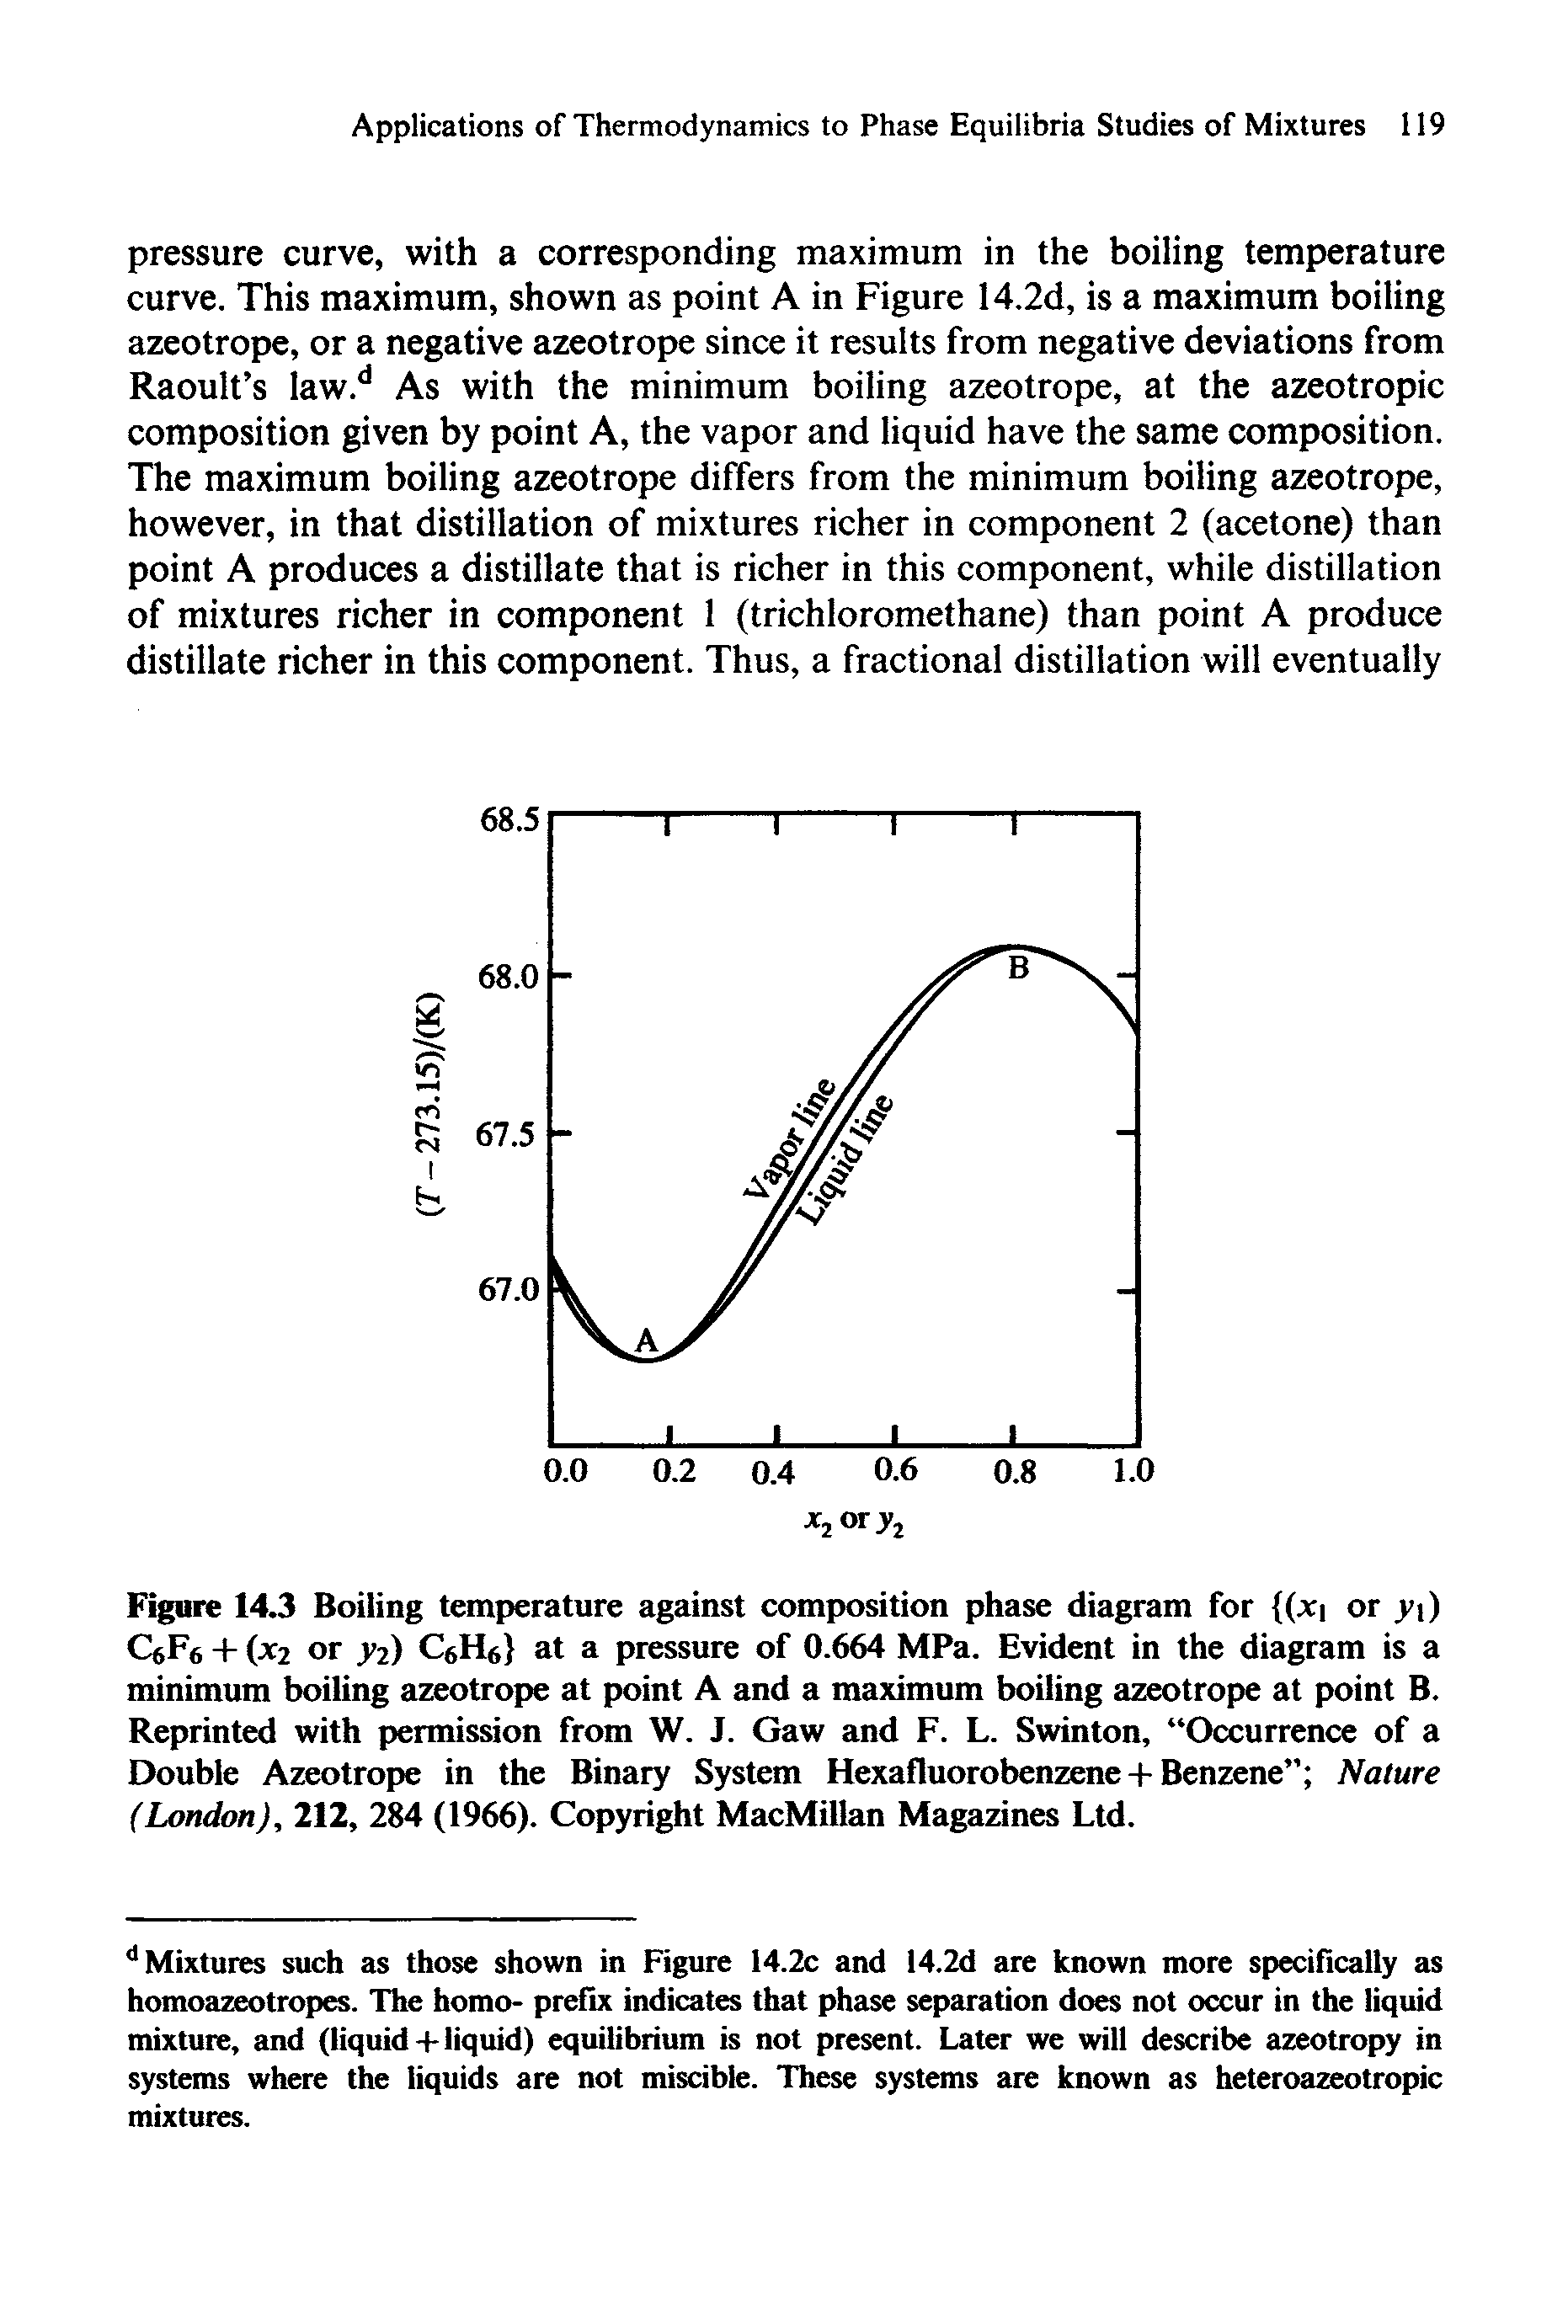 Figure 14.3 Boiling temperature against composition phase diagram for (xi or yi) C6F6 + (jt2 or y ) Cgf at a pressure of 0.664 MPa. Evident in the diagram is a minimum boiling azeotrope at point A and a maximum boiling azeotrope at point B. Reprinted with permission from W. J. Gaw and F. L. Swinton, Occurrence of a Double Azeotrope in the Binary System Hexafluorobenzene + Benzene Nature (London), 212, 284 (1966). Copyright MacMillan Magazines Ltd.